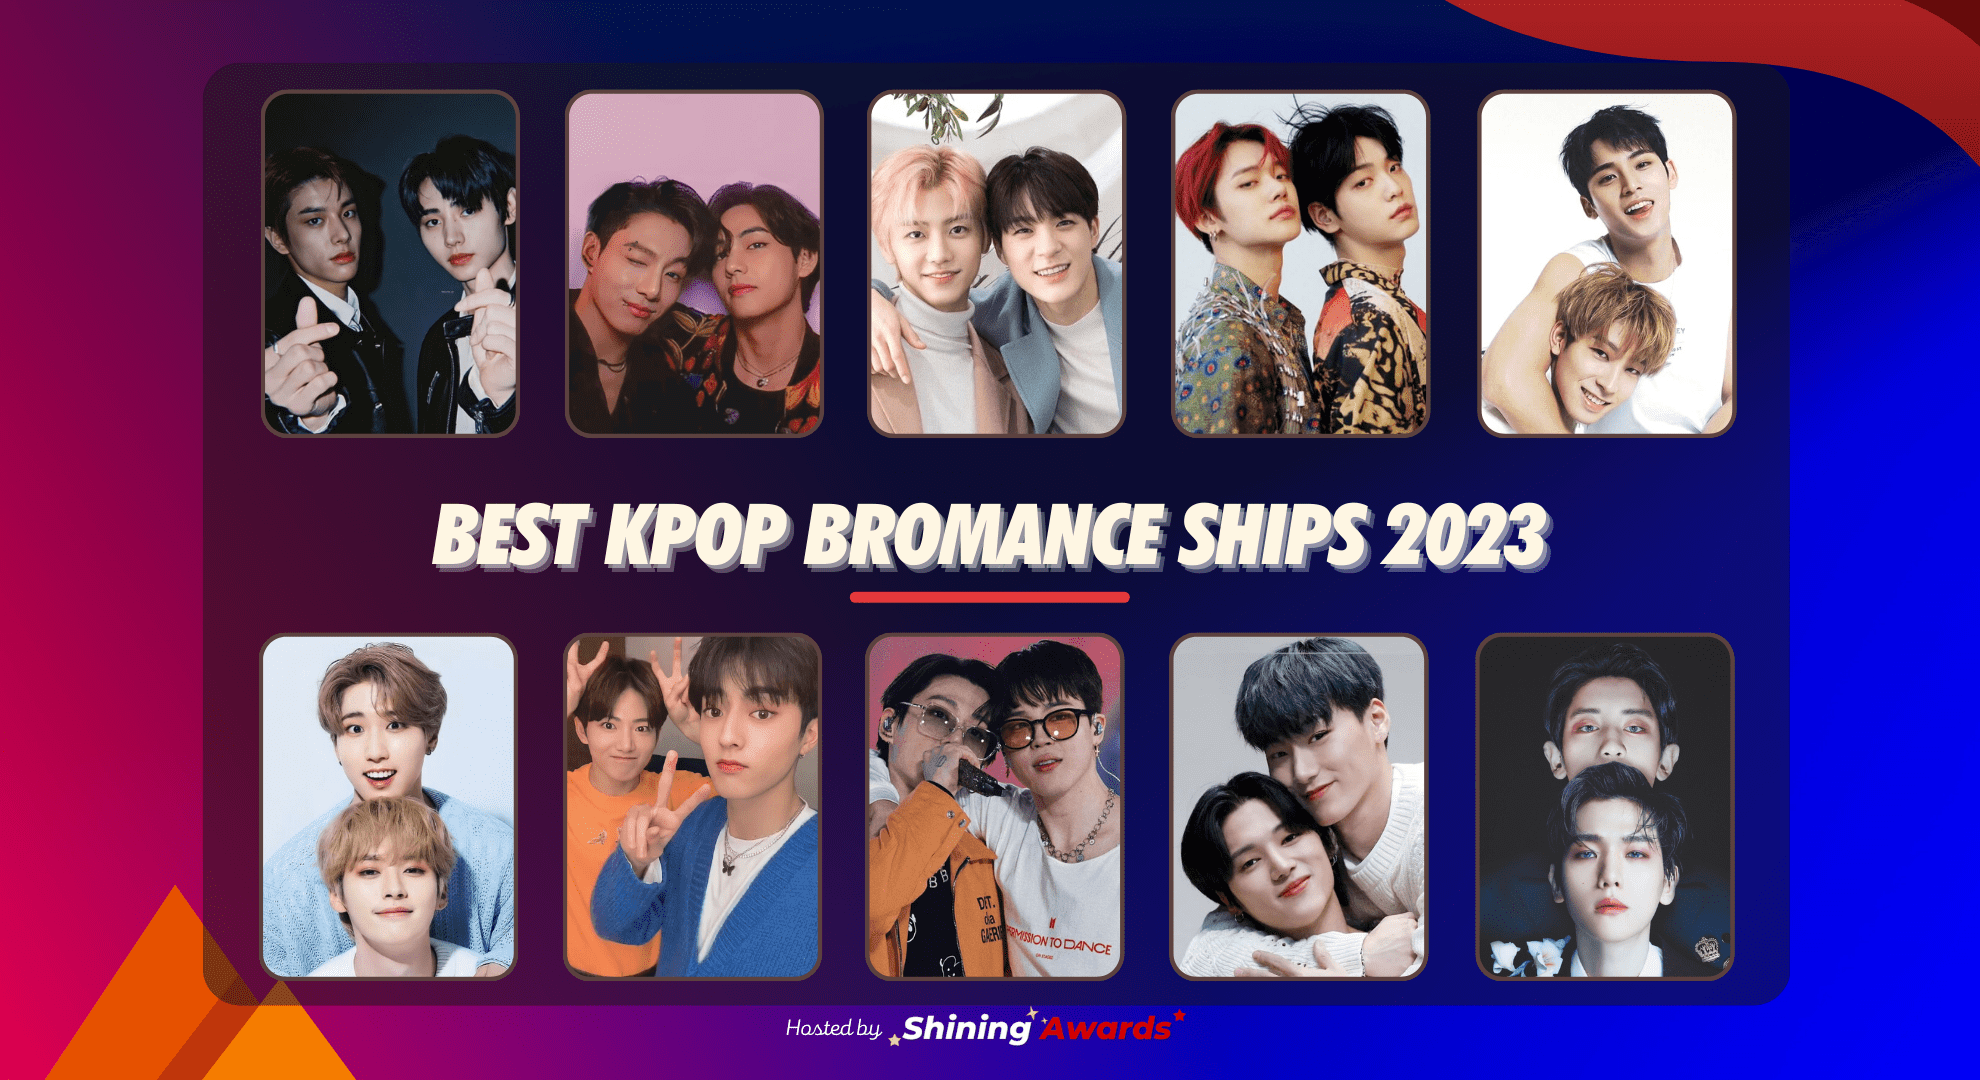 BTS vs EXO: Which is the best K-Pop Group in 2022? (POLL) VOTE